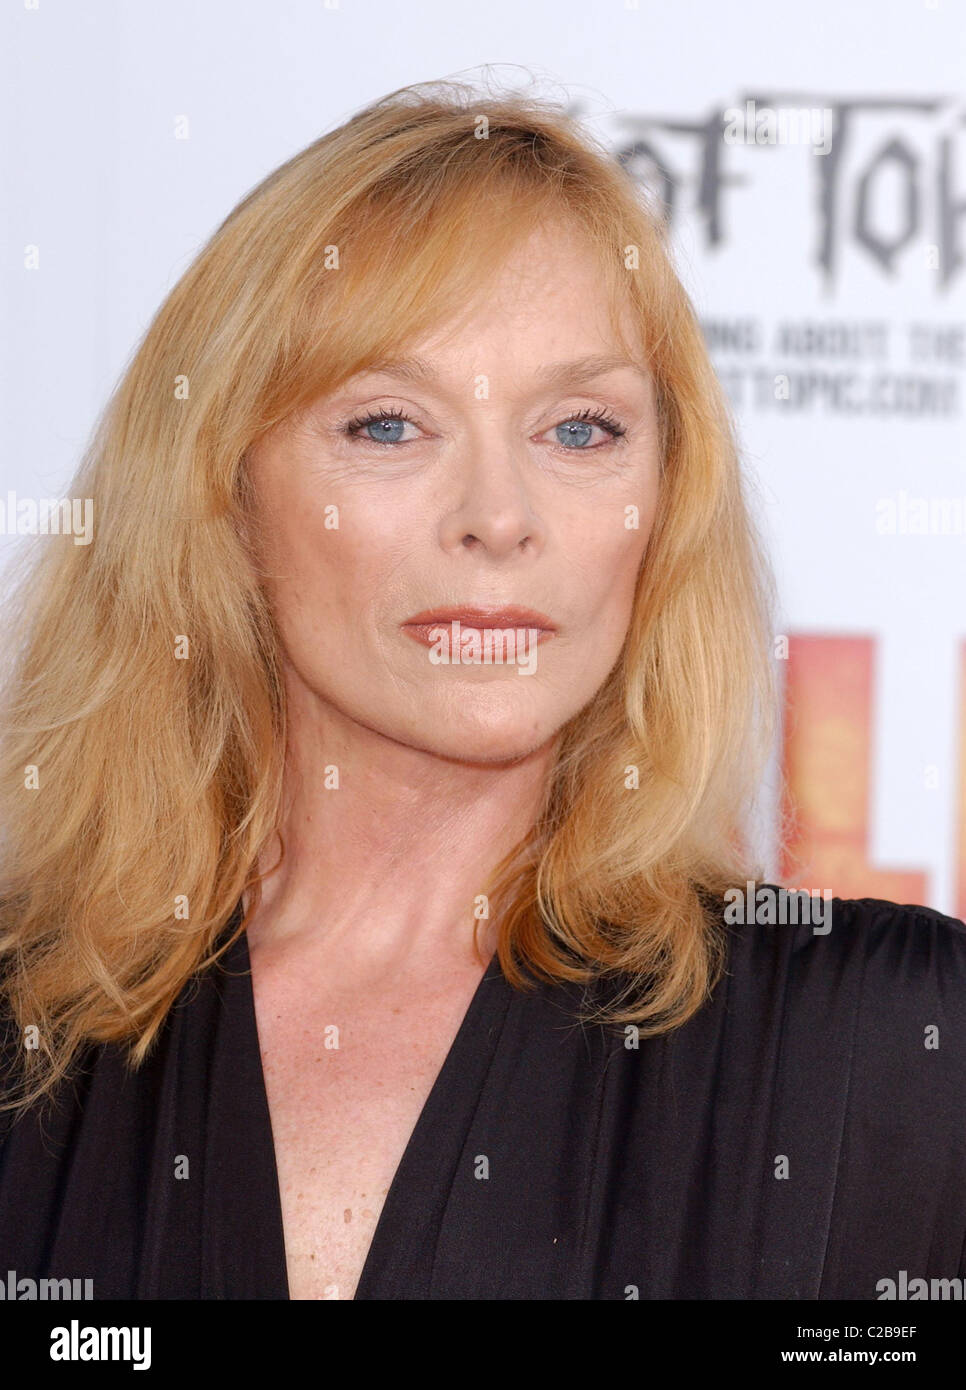 Sybil Danning 'Halloween' premiere held at Mann's Chinese Theater - Arrivals Hollywood, California - 23.08.07 Stock Photo